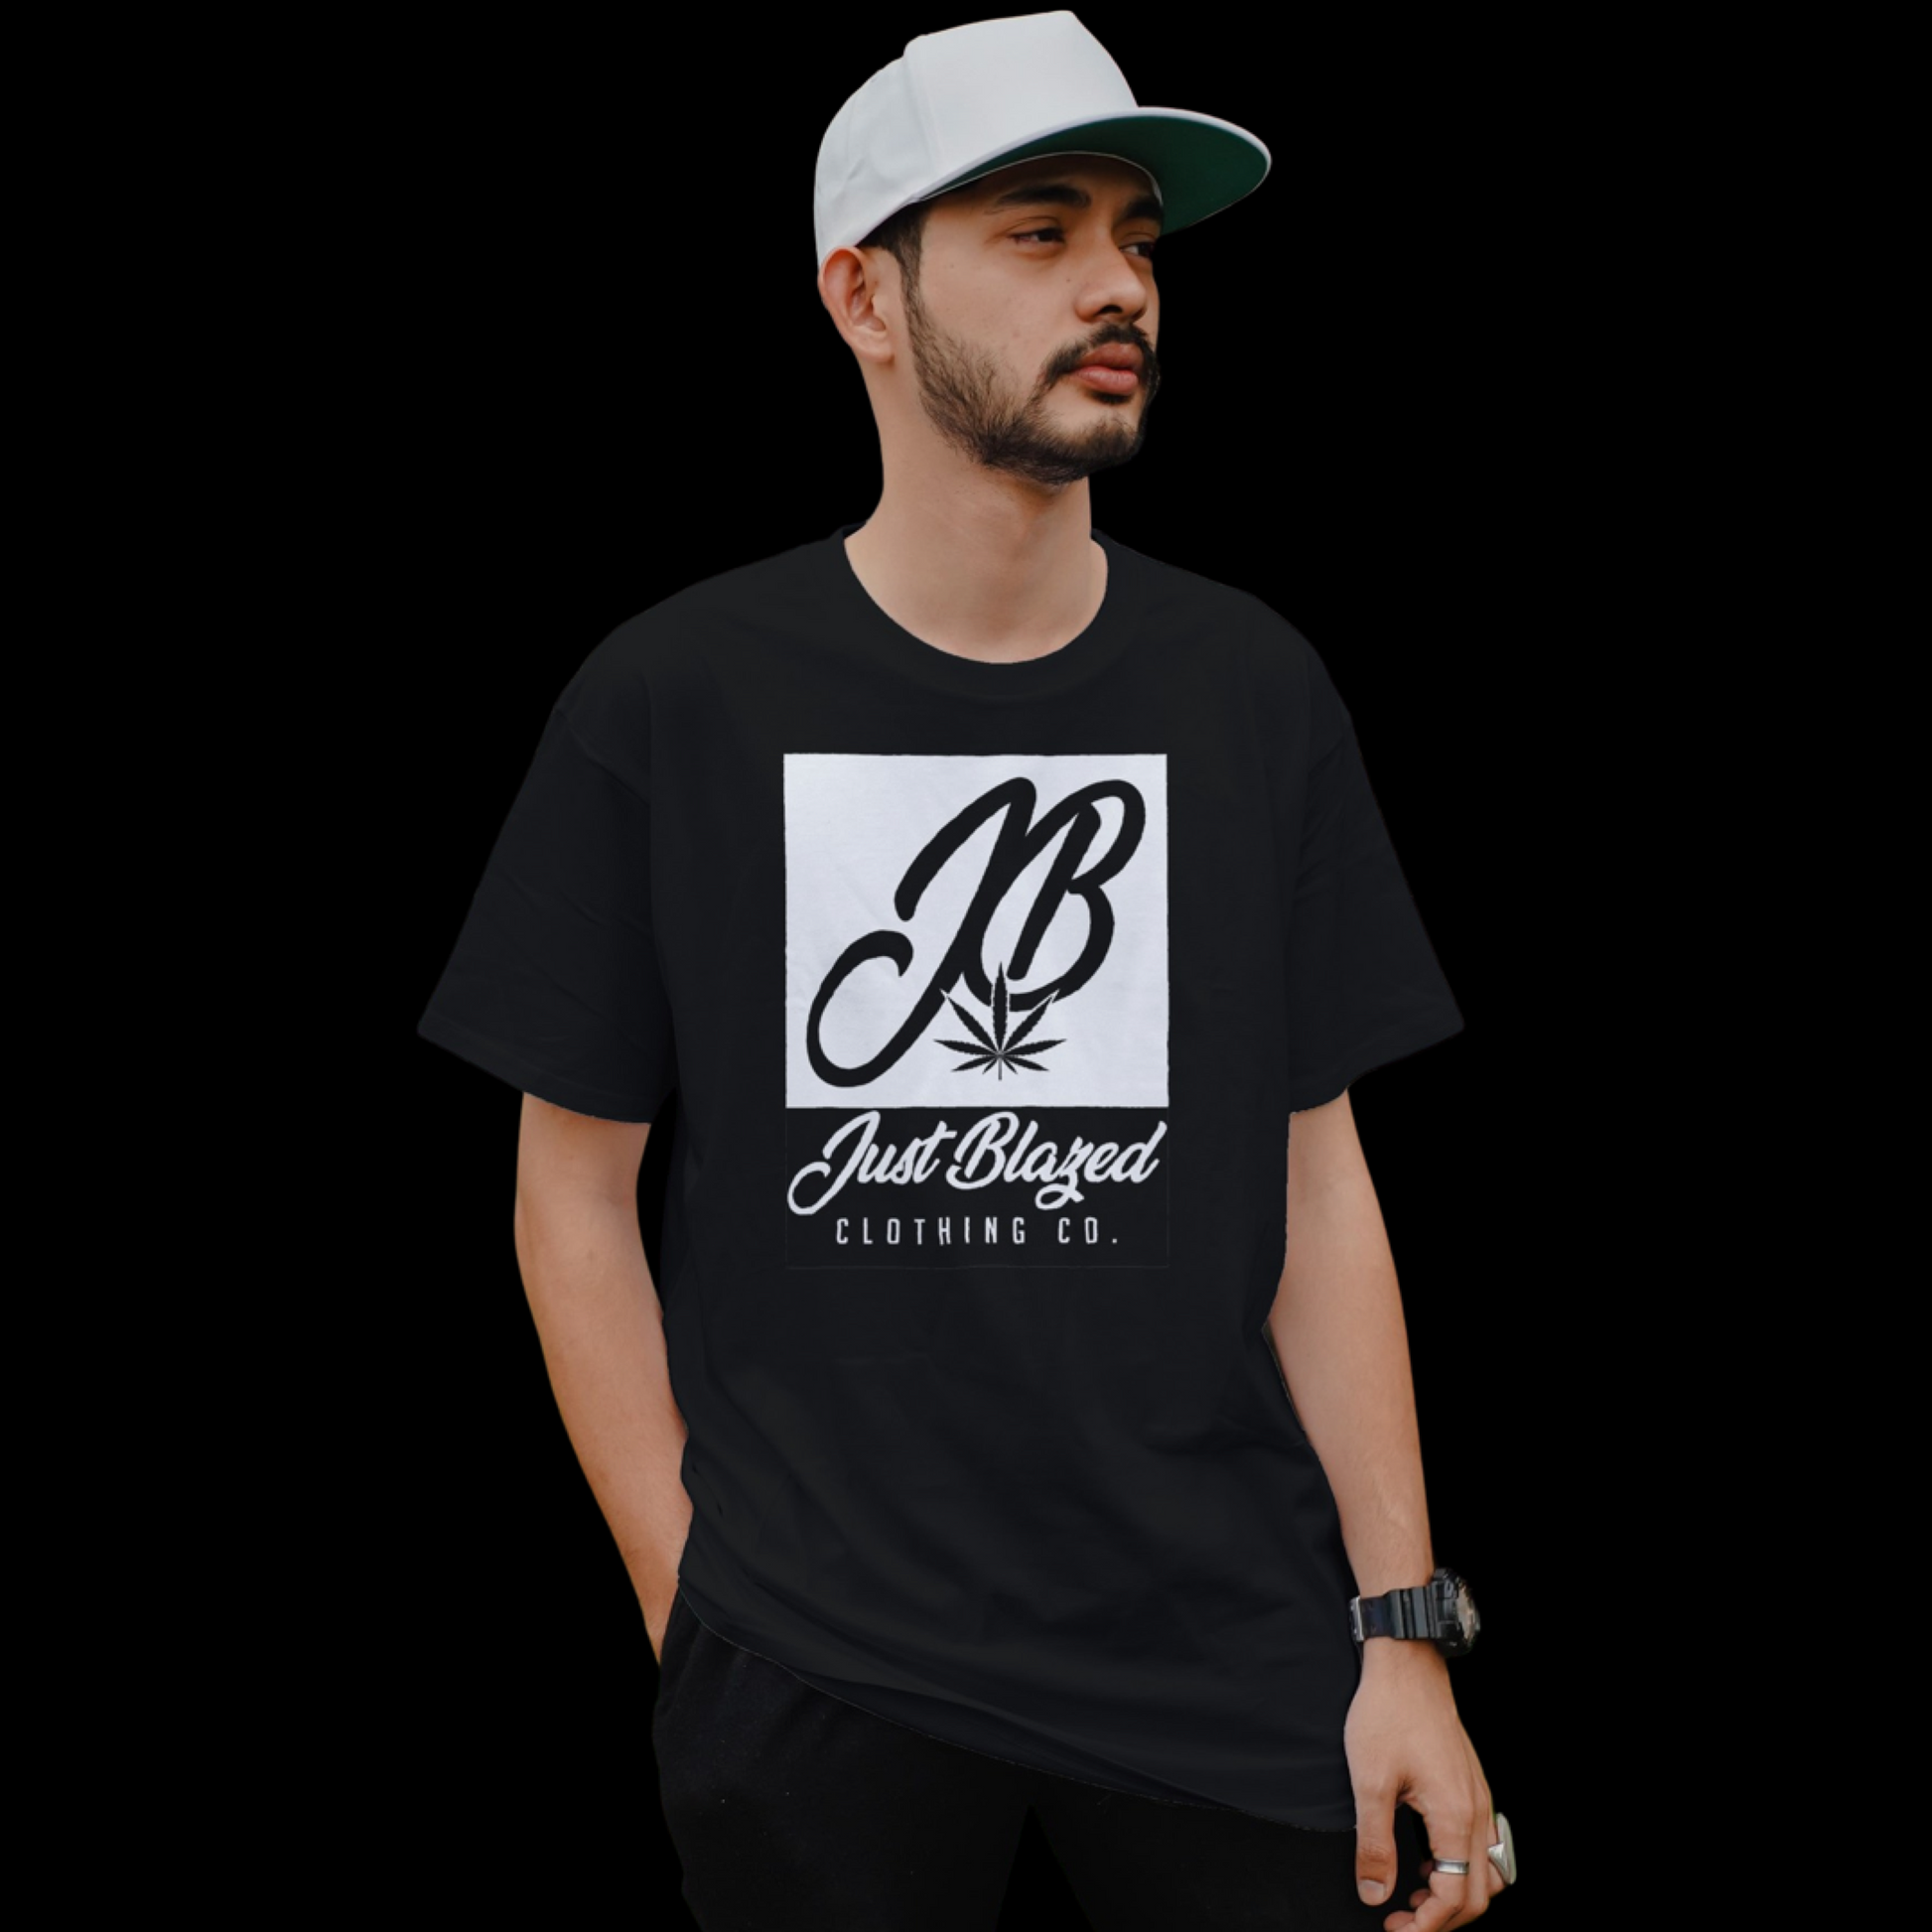 JB Collection  Clothing Store in Miami